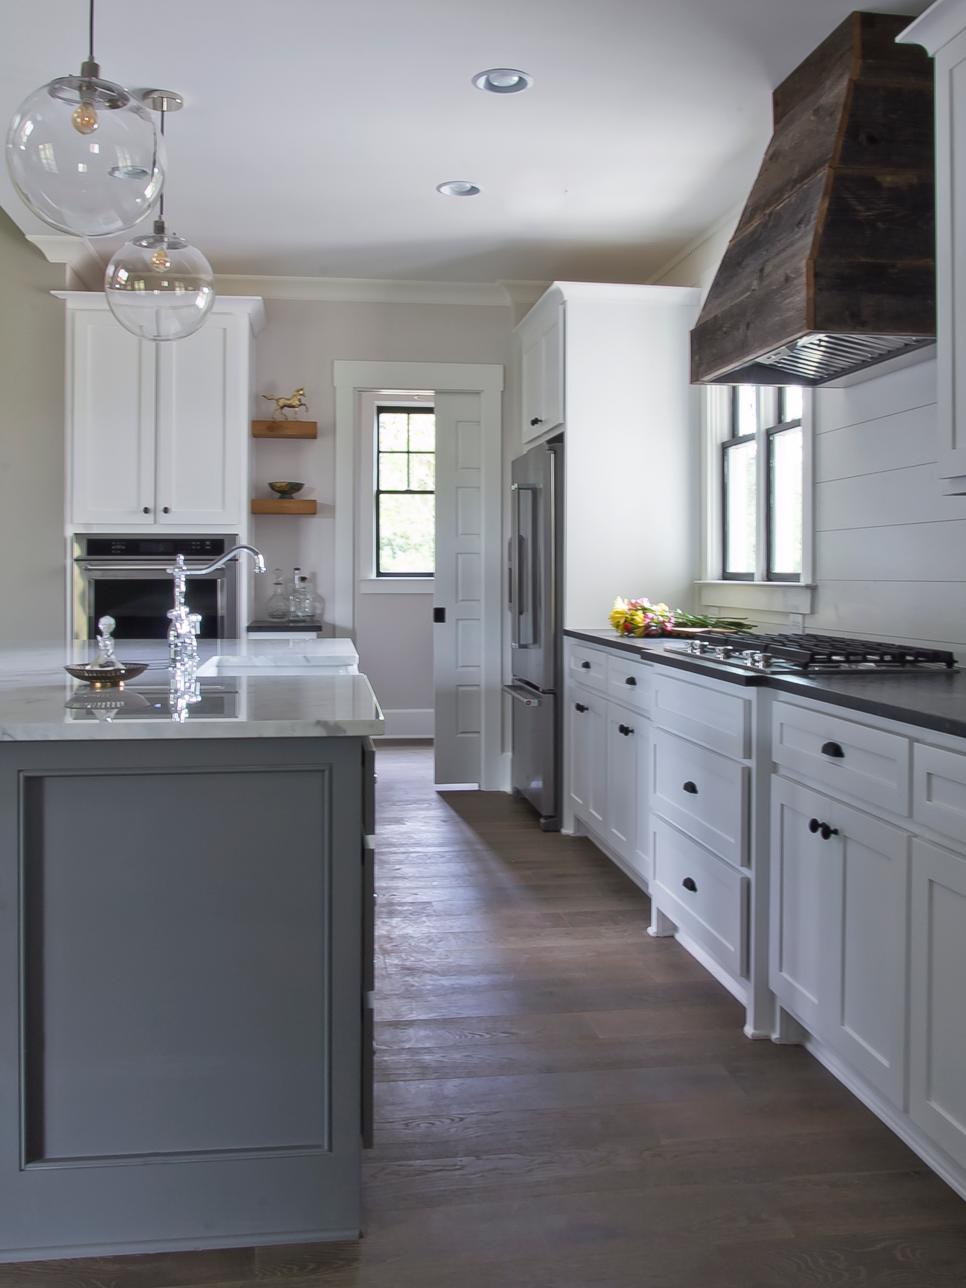 farmhouse kitchen hgtv hood rustic kitchens vent river casual wood lineberry austin building